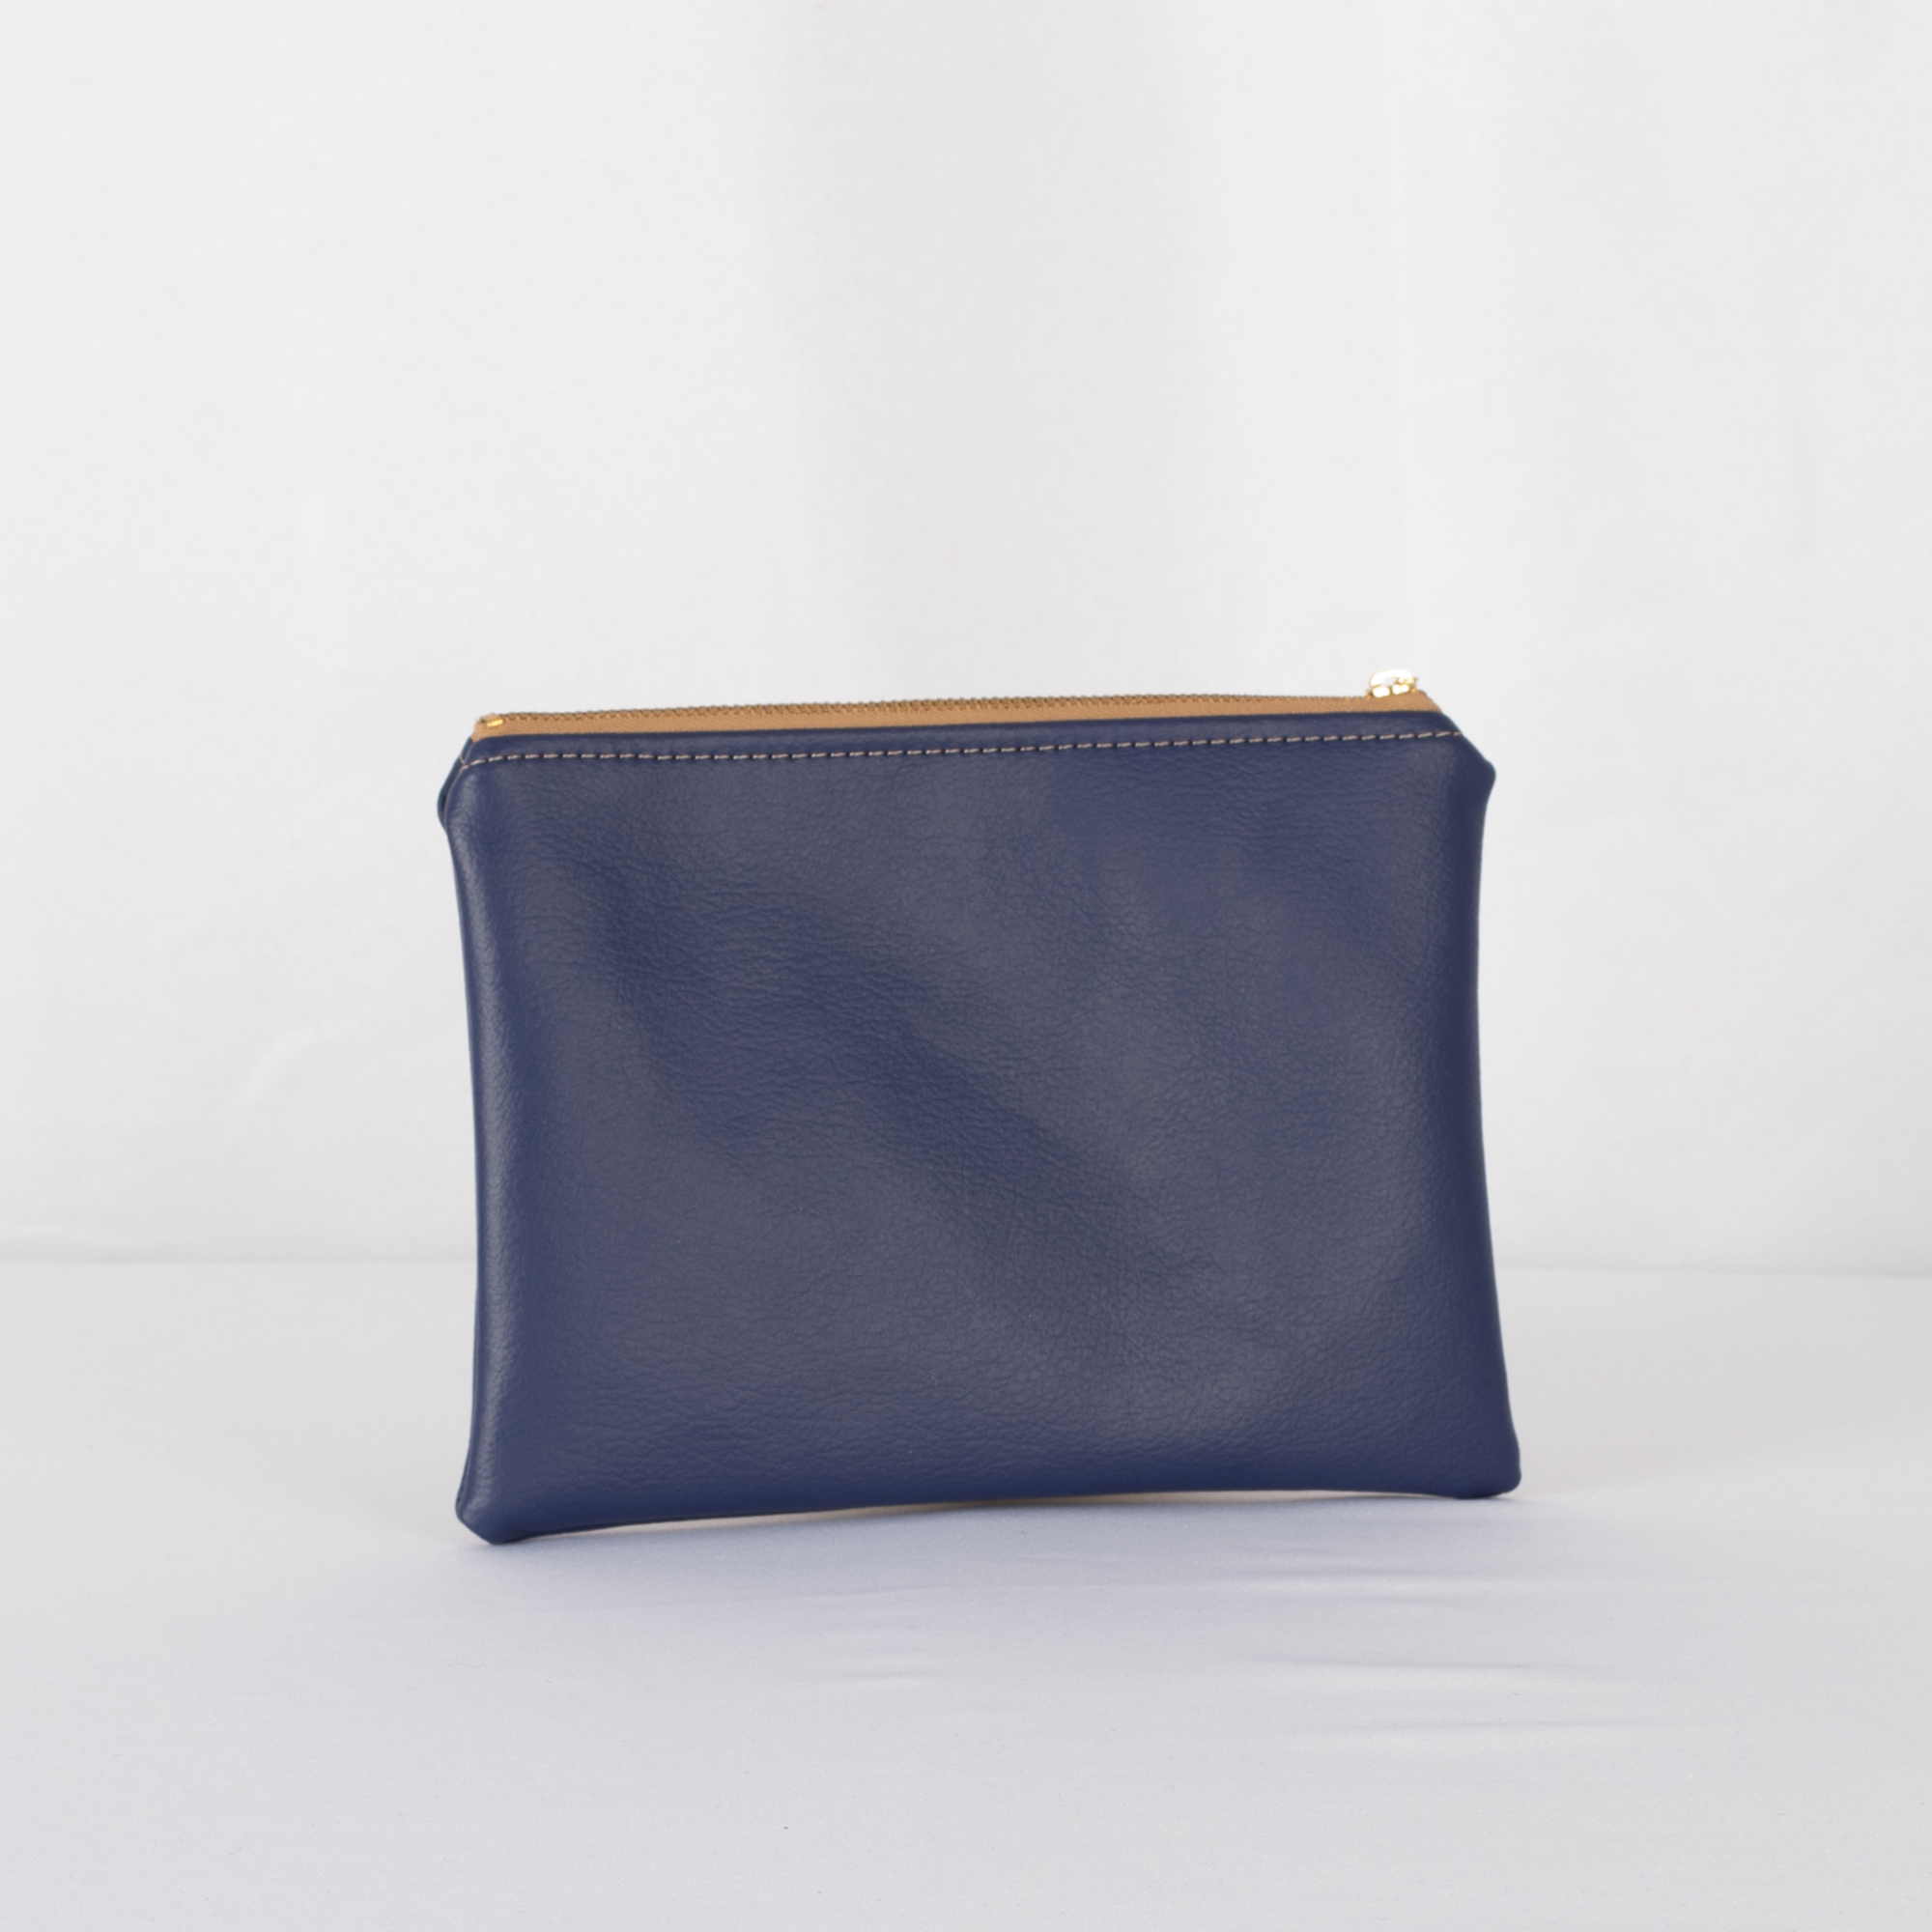 Zip Pouch from Southwest Airlines Leather